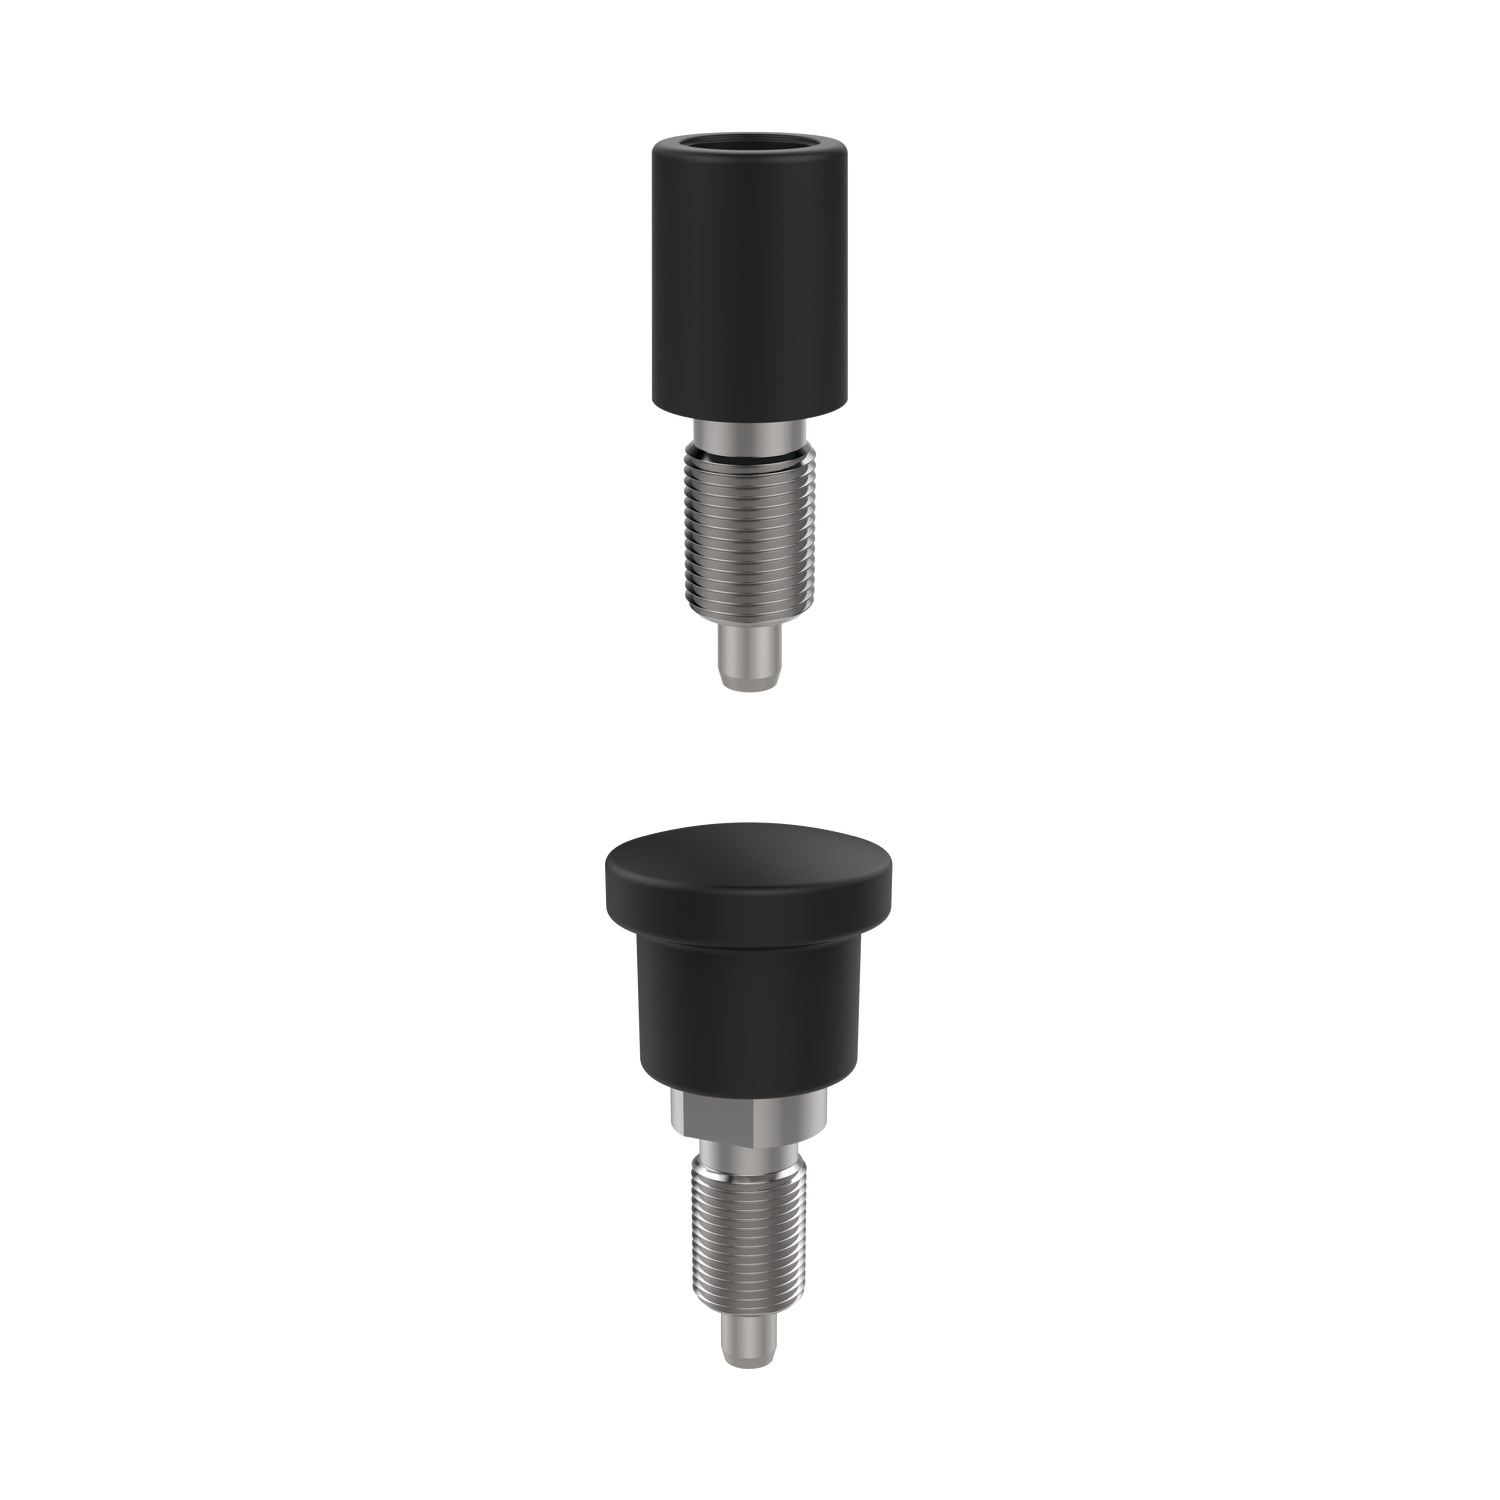 32782.W0358 Safety Index Plunger non-standard - locking pin retracted at start position, Material: Steel